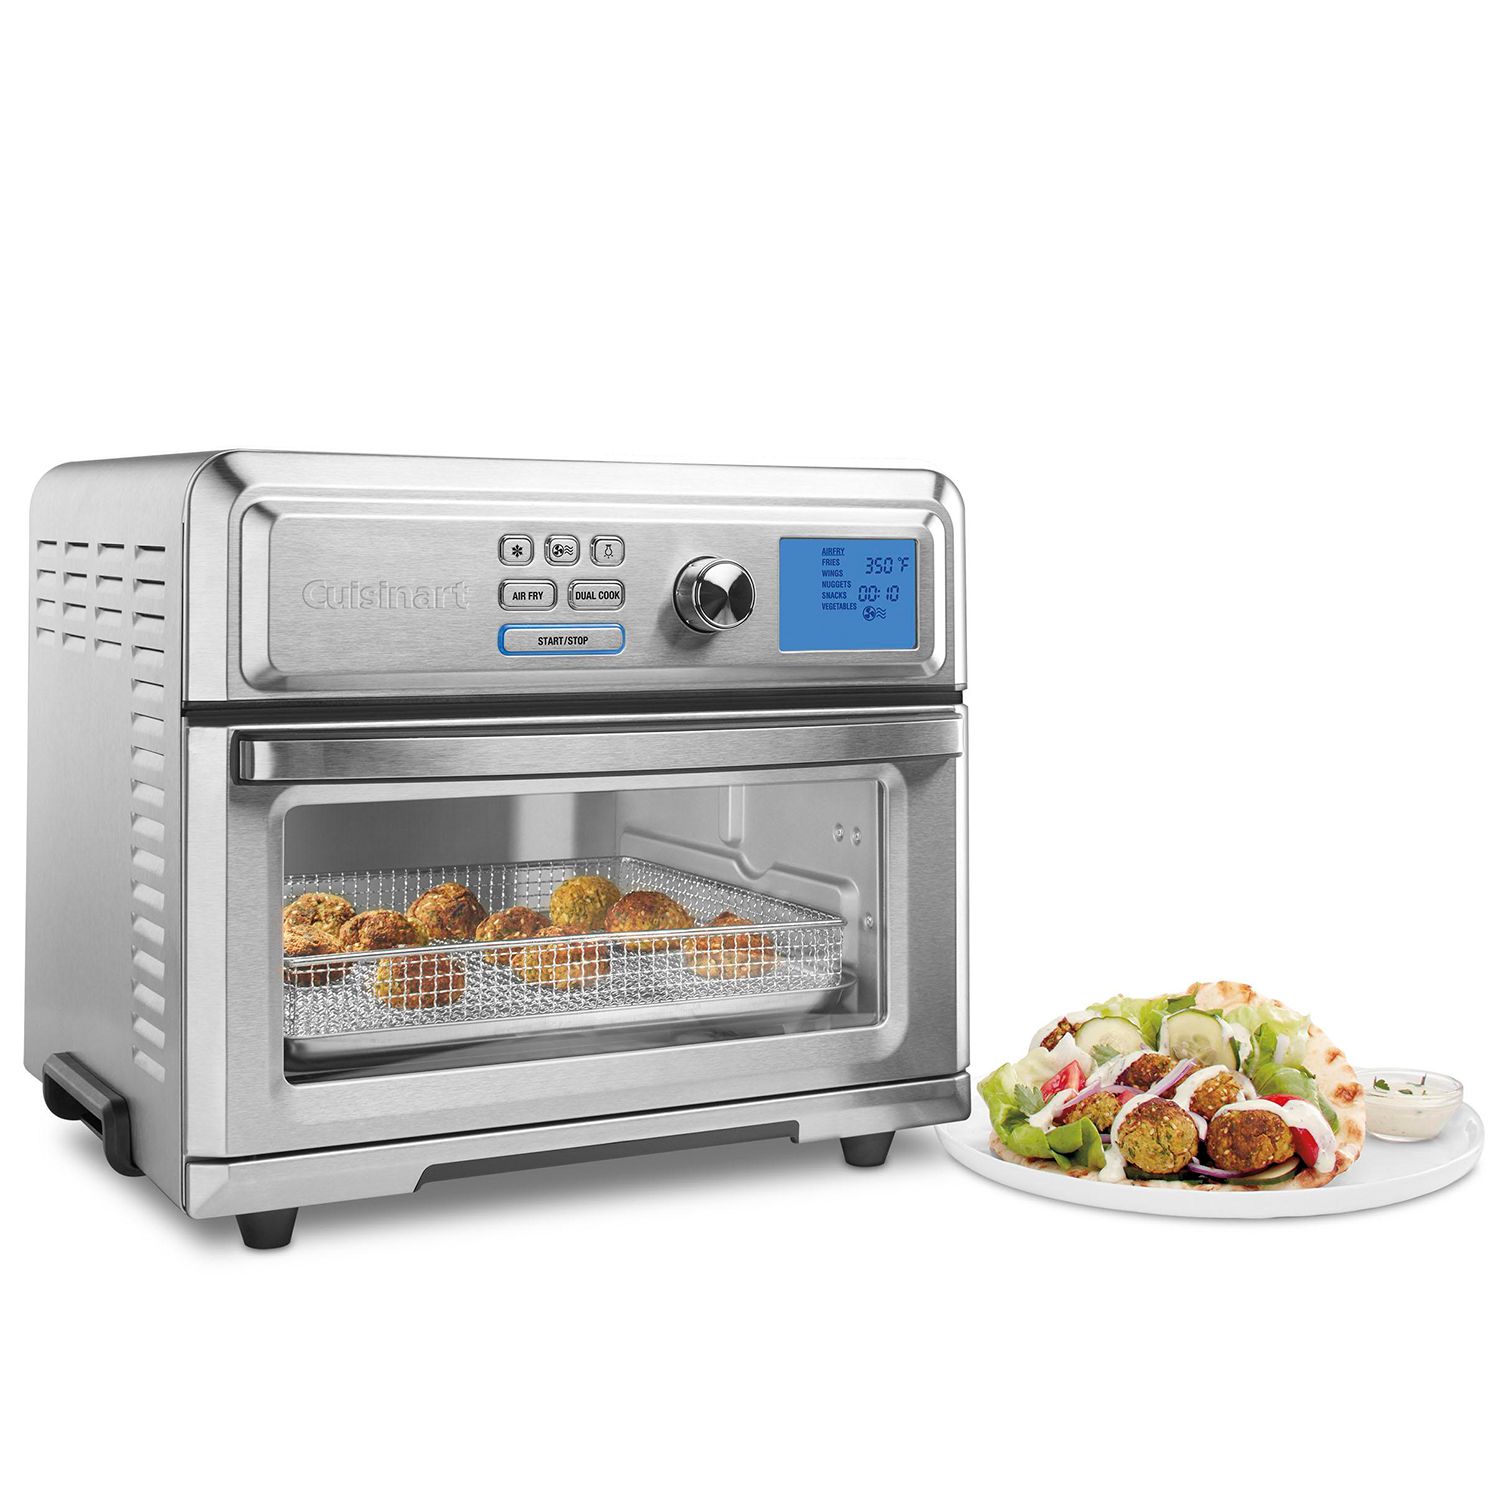 Emeril Lagasse – Air Fry Toaster Oven – Brushed Stainless Steel